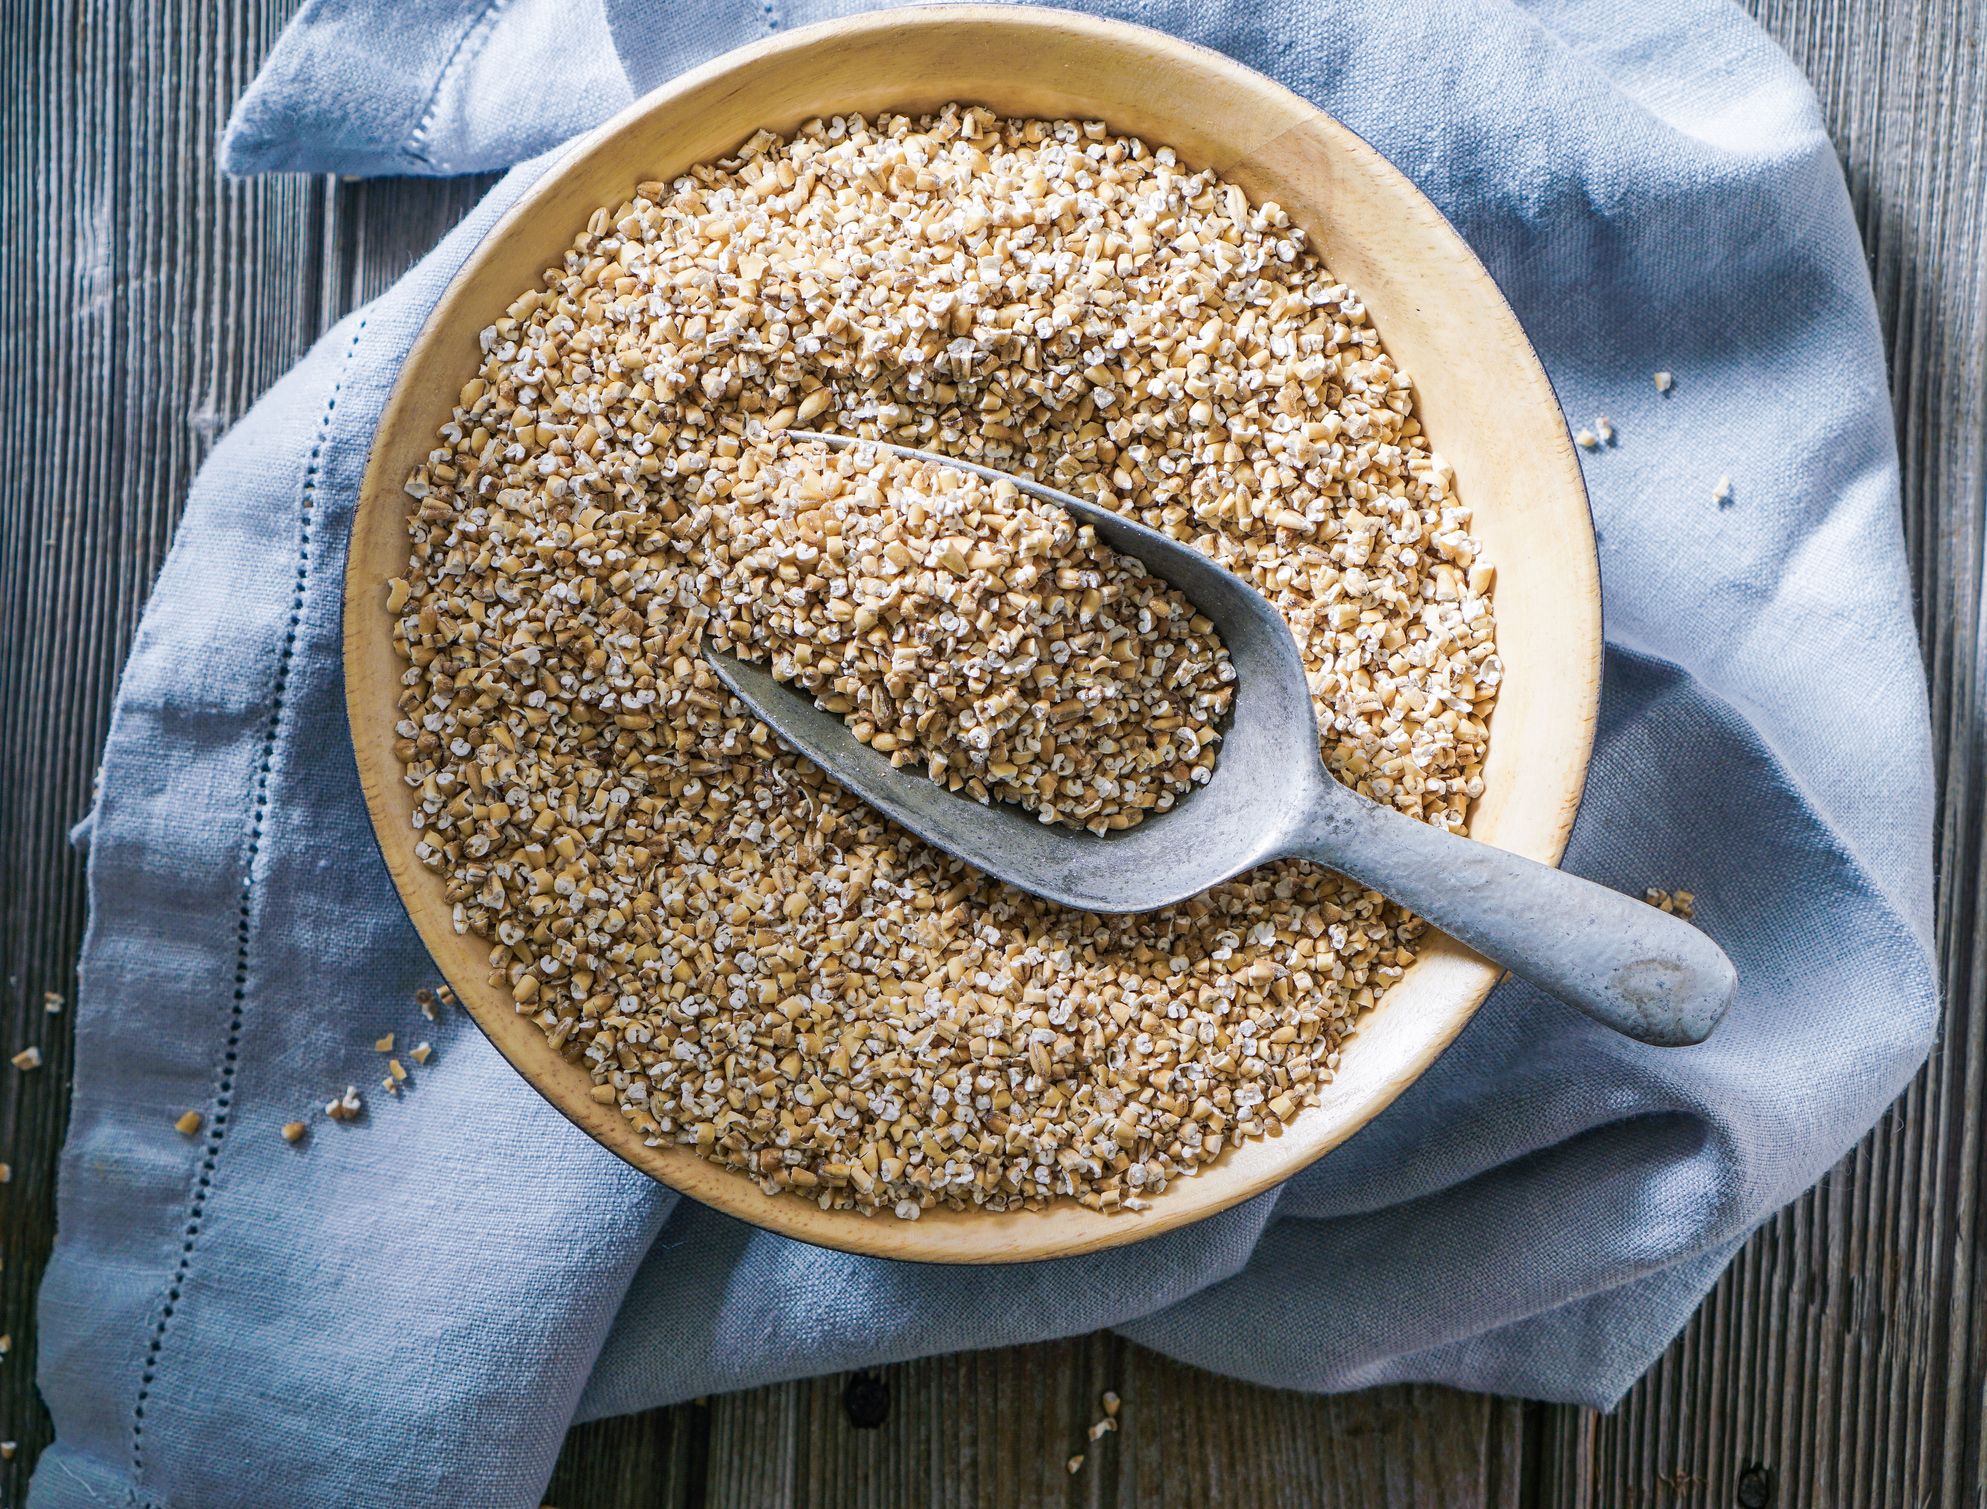 are rolled oats healthier than quick oats